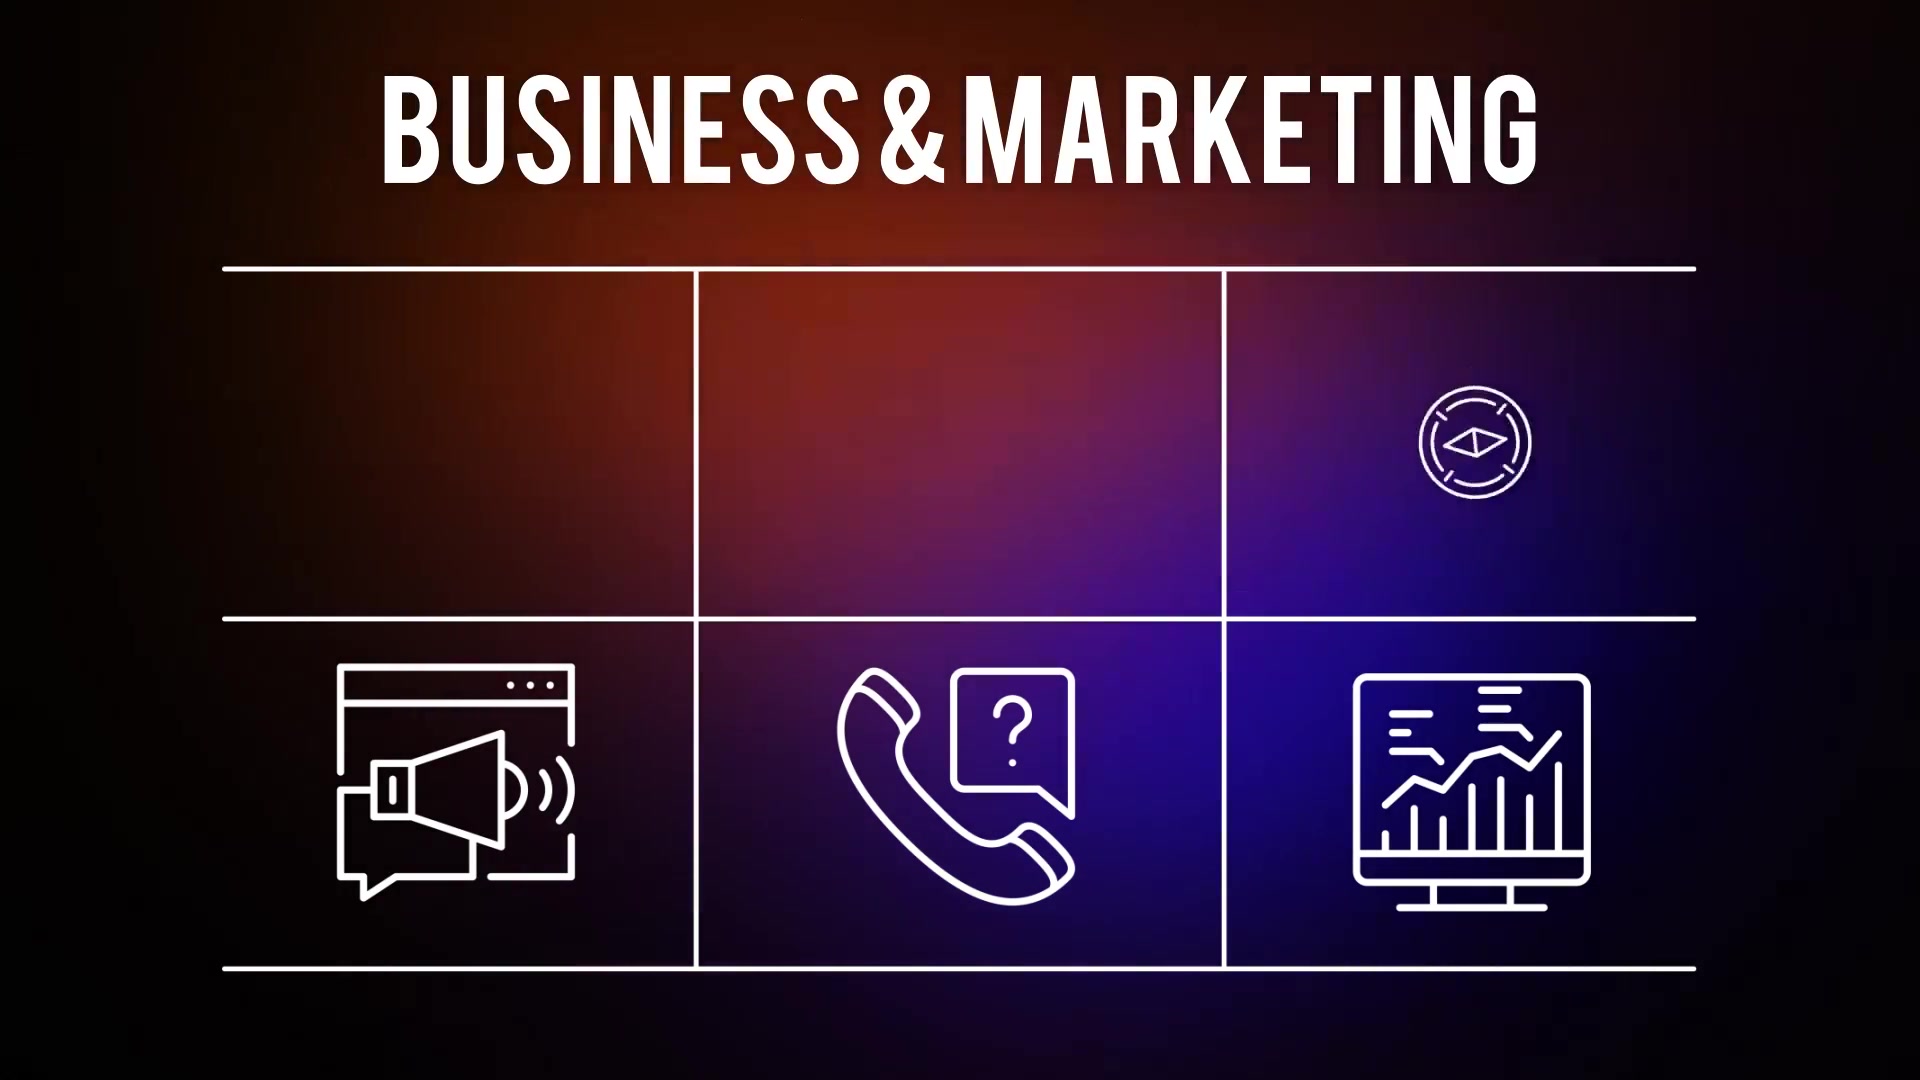 Business And Marketing 25 Line Icons - Download Videohive 23185402